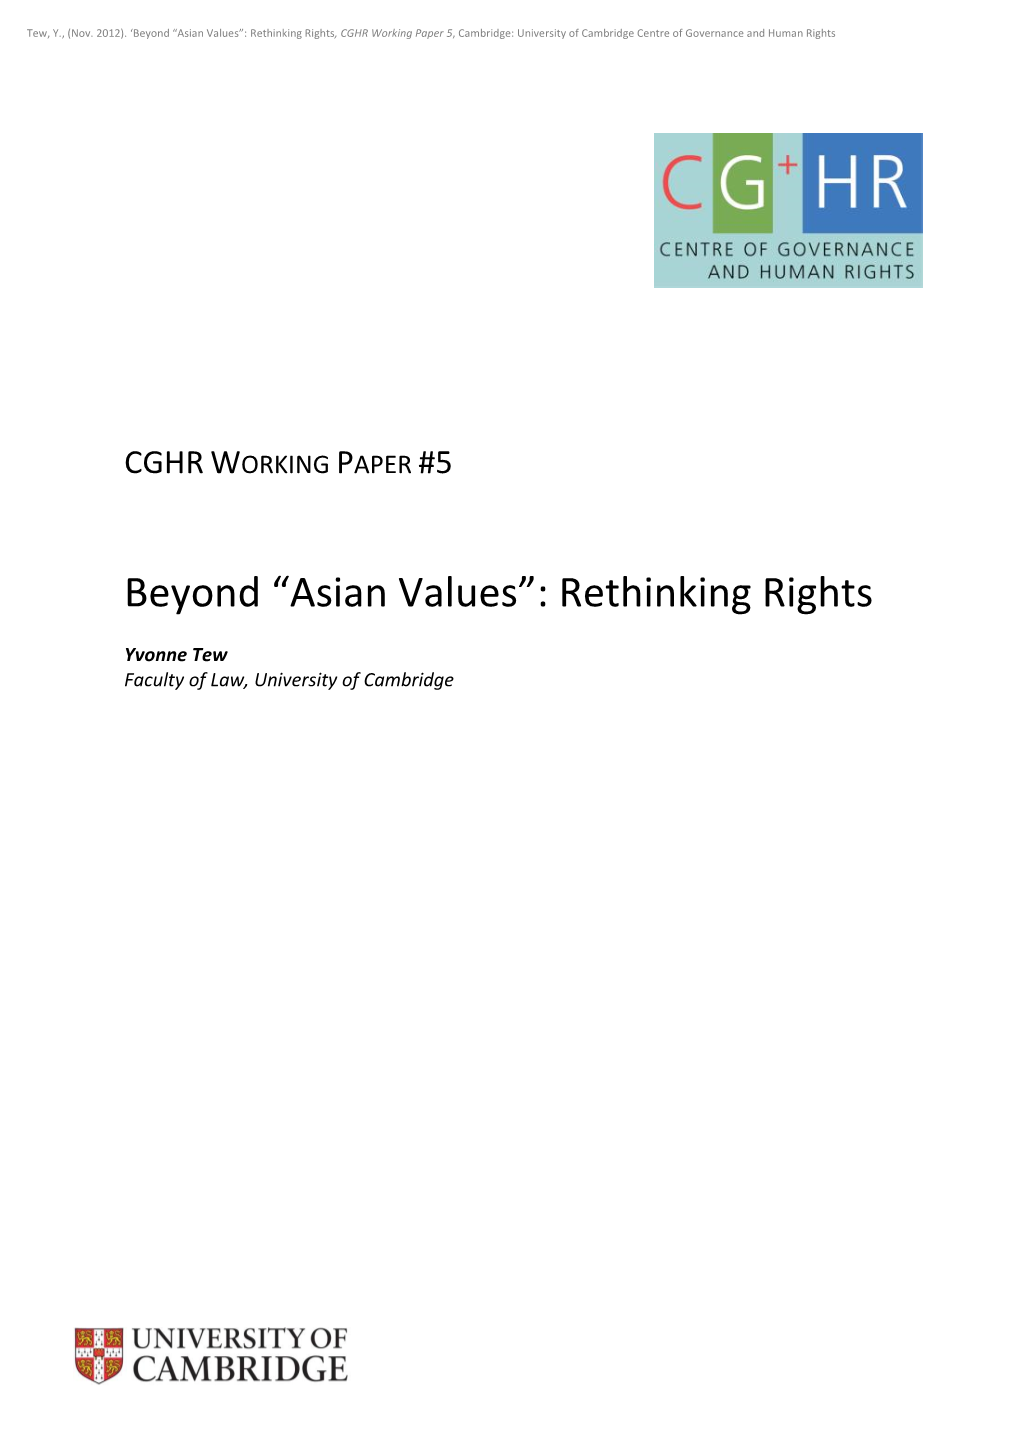 Beyond “Asian Values”: Rethinking Rights, CGHR Working Paper 5, Cambridge: University of Cambridge Centre of Governance and Human Rights